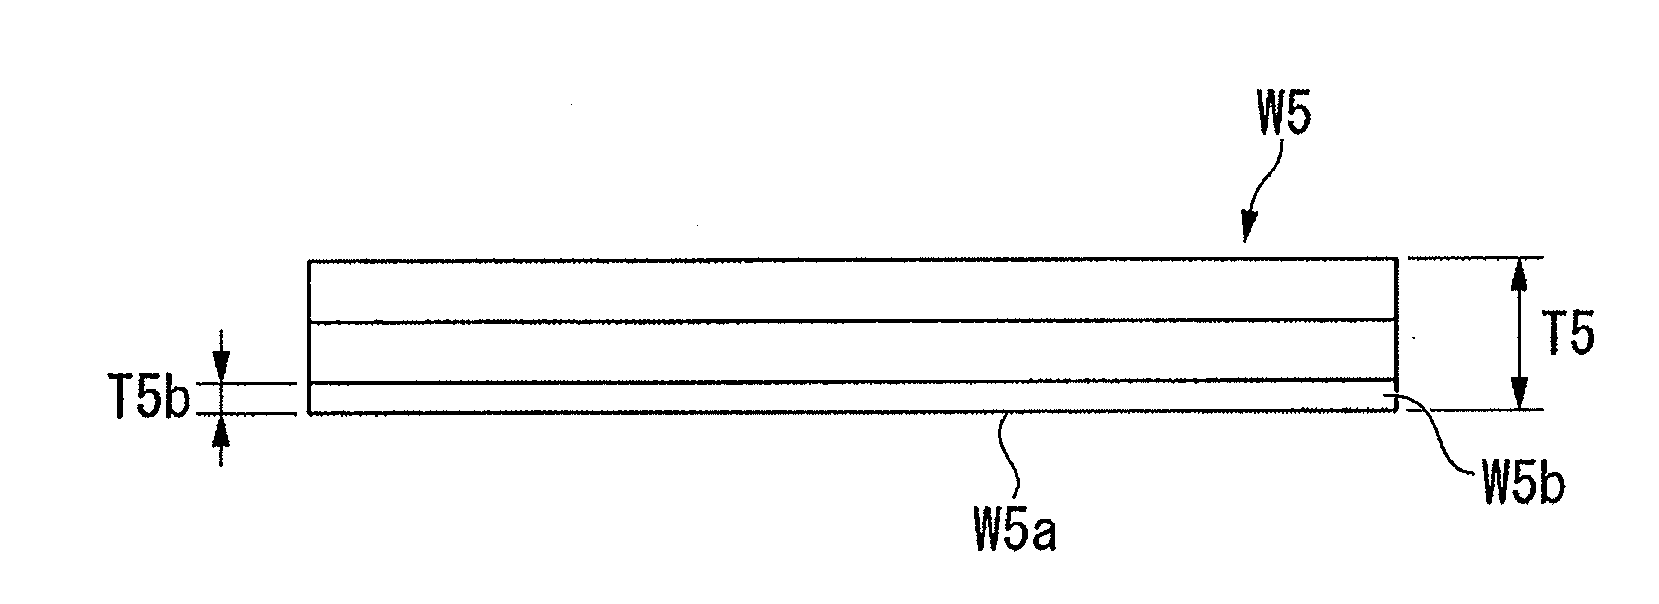 Thin silicon wafer and method of manufacturing the same